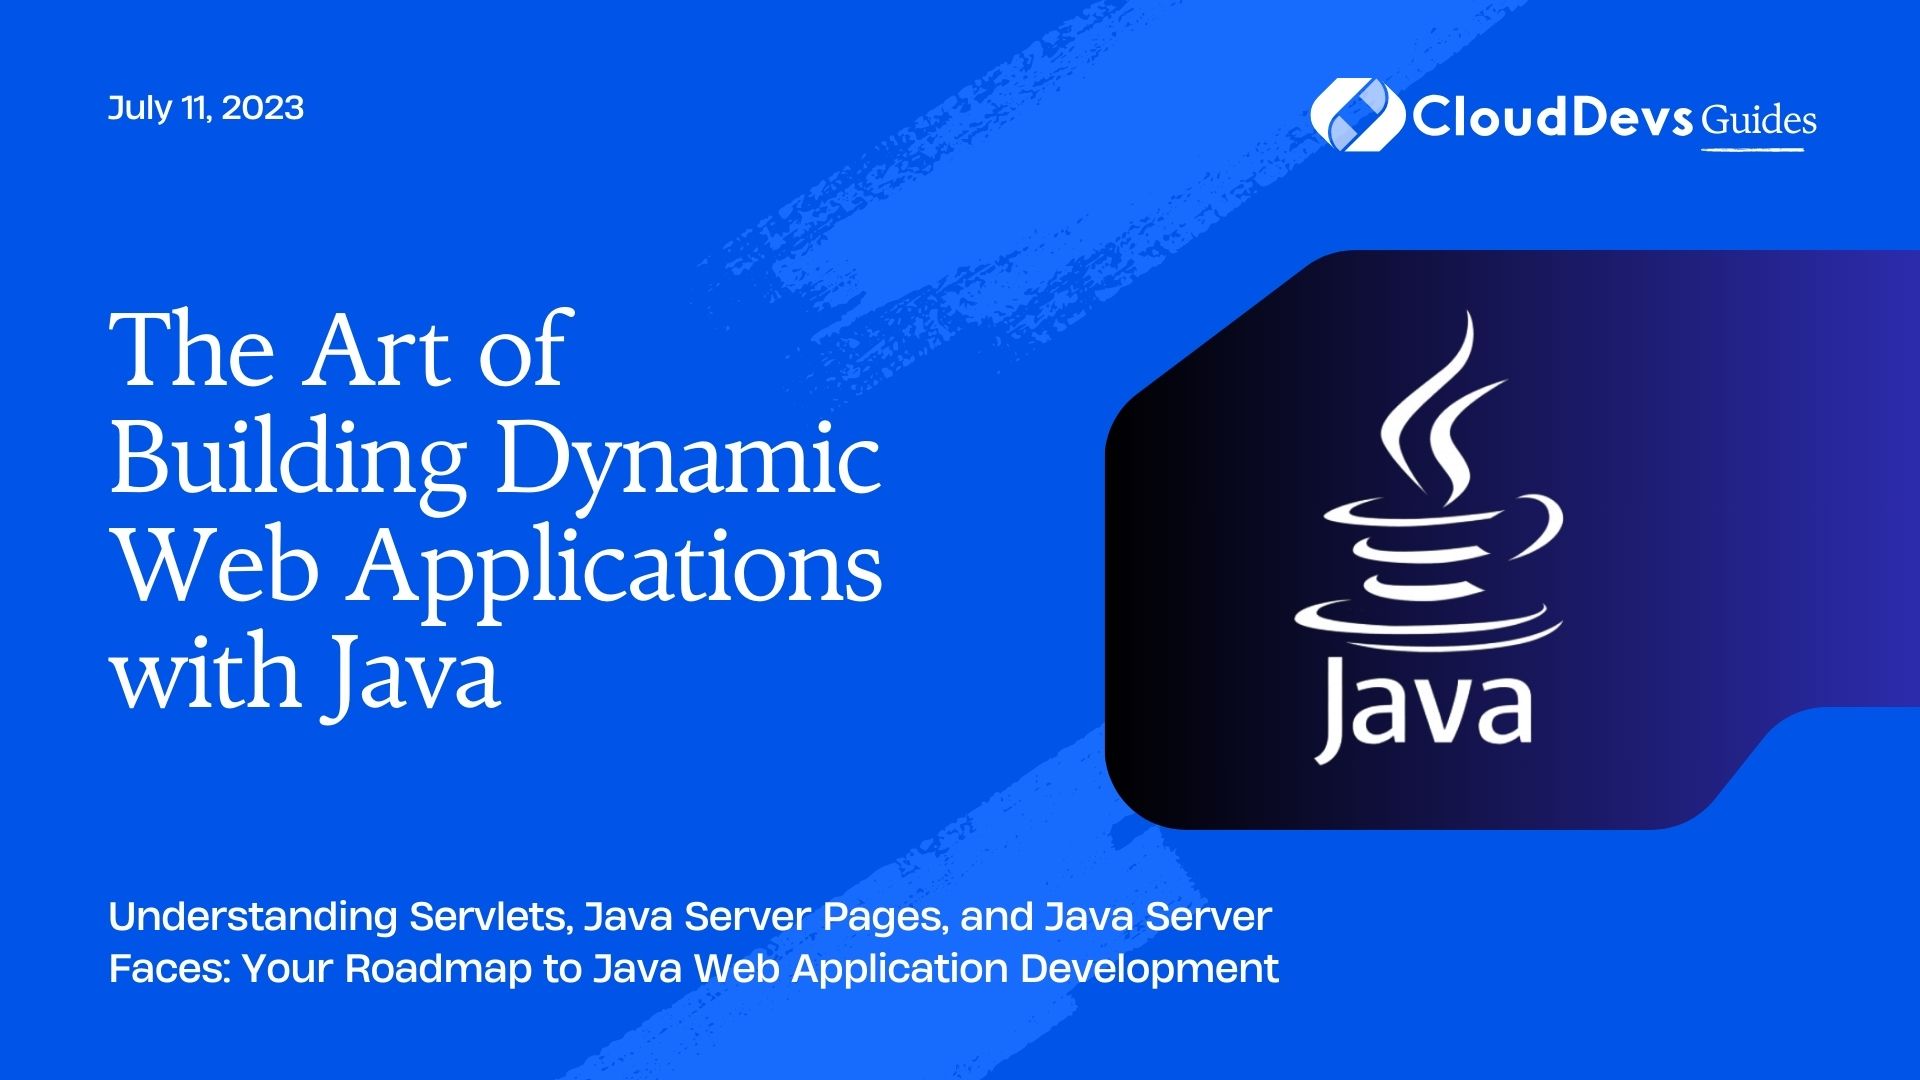 The Art of Building Dynamic Web Applications with Java